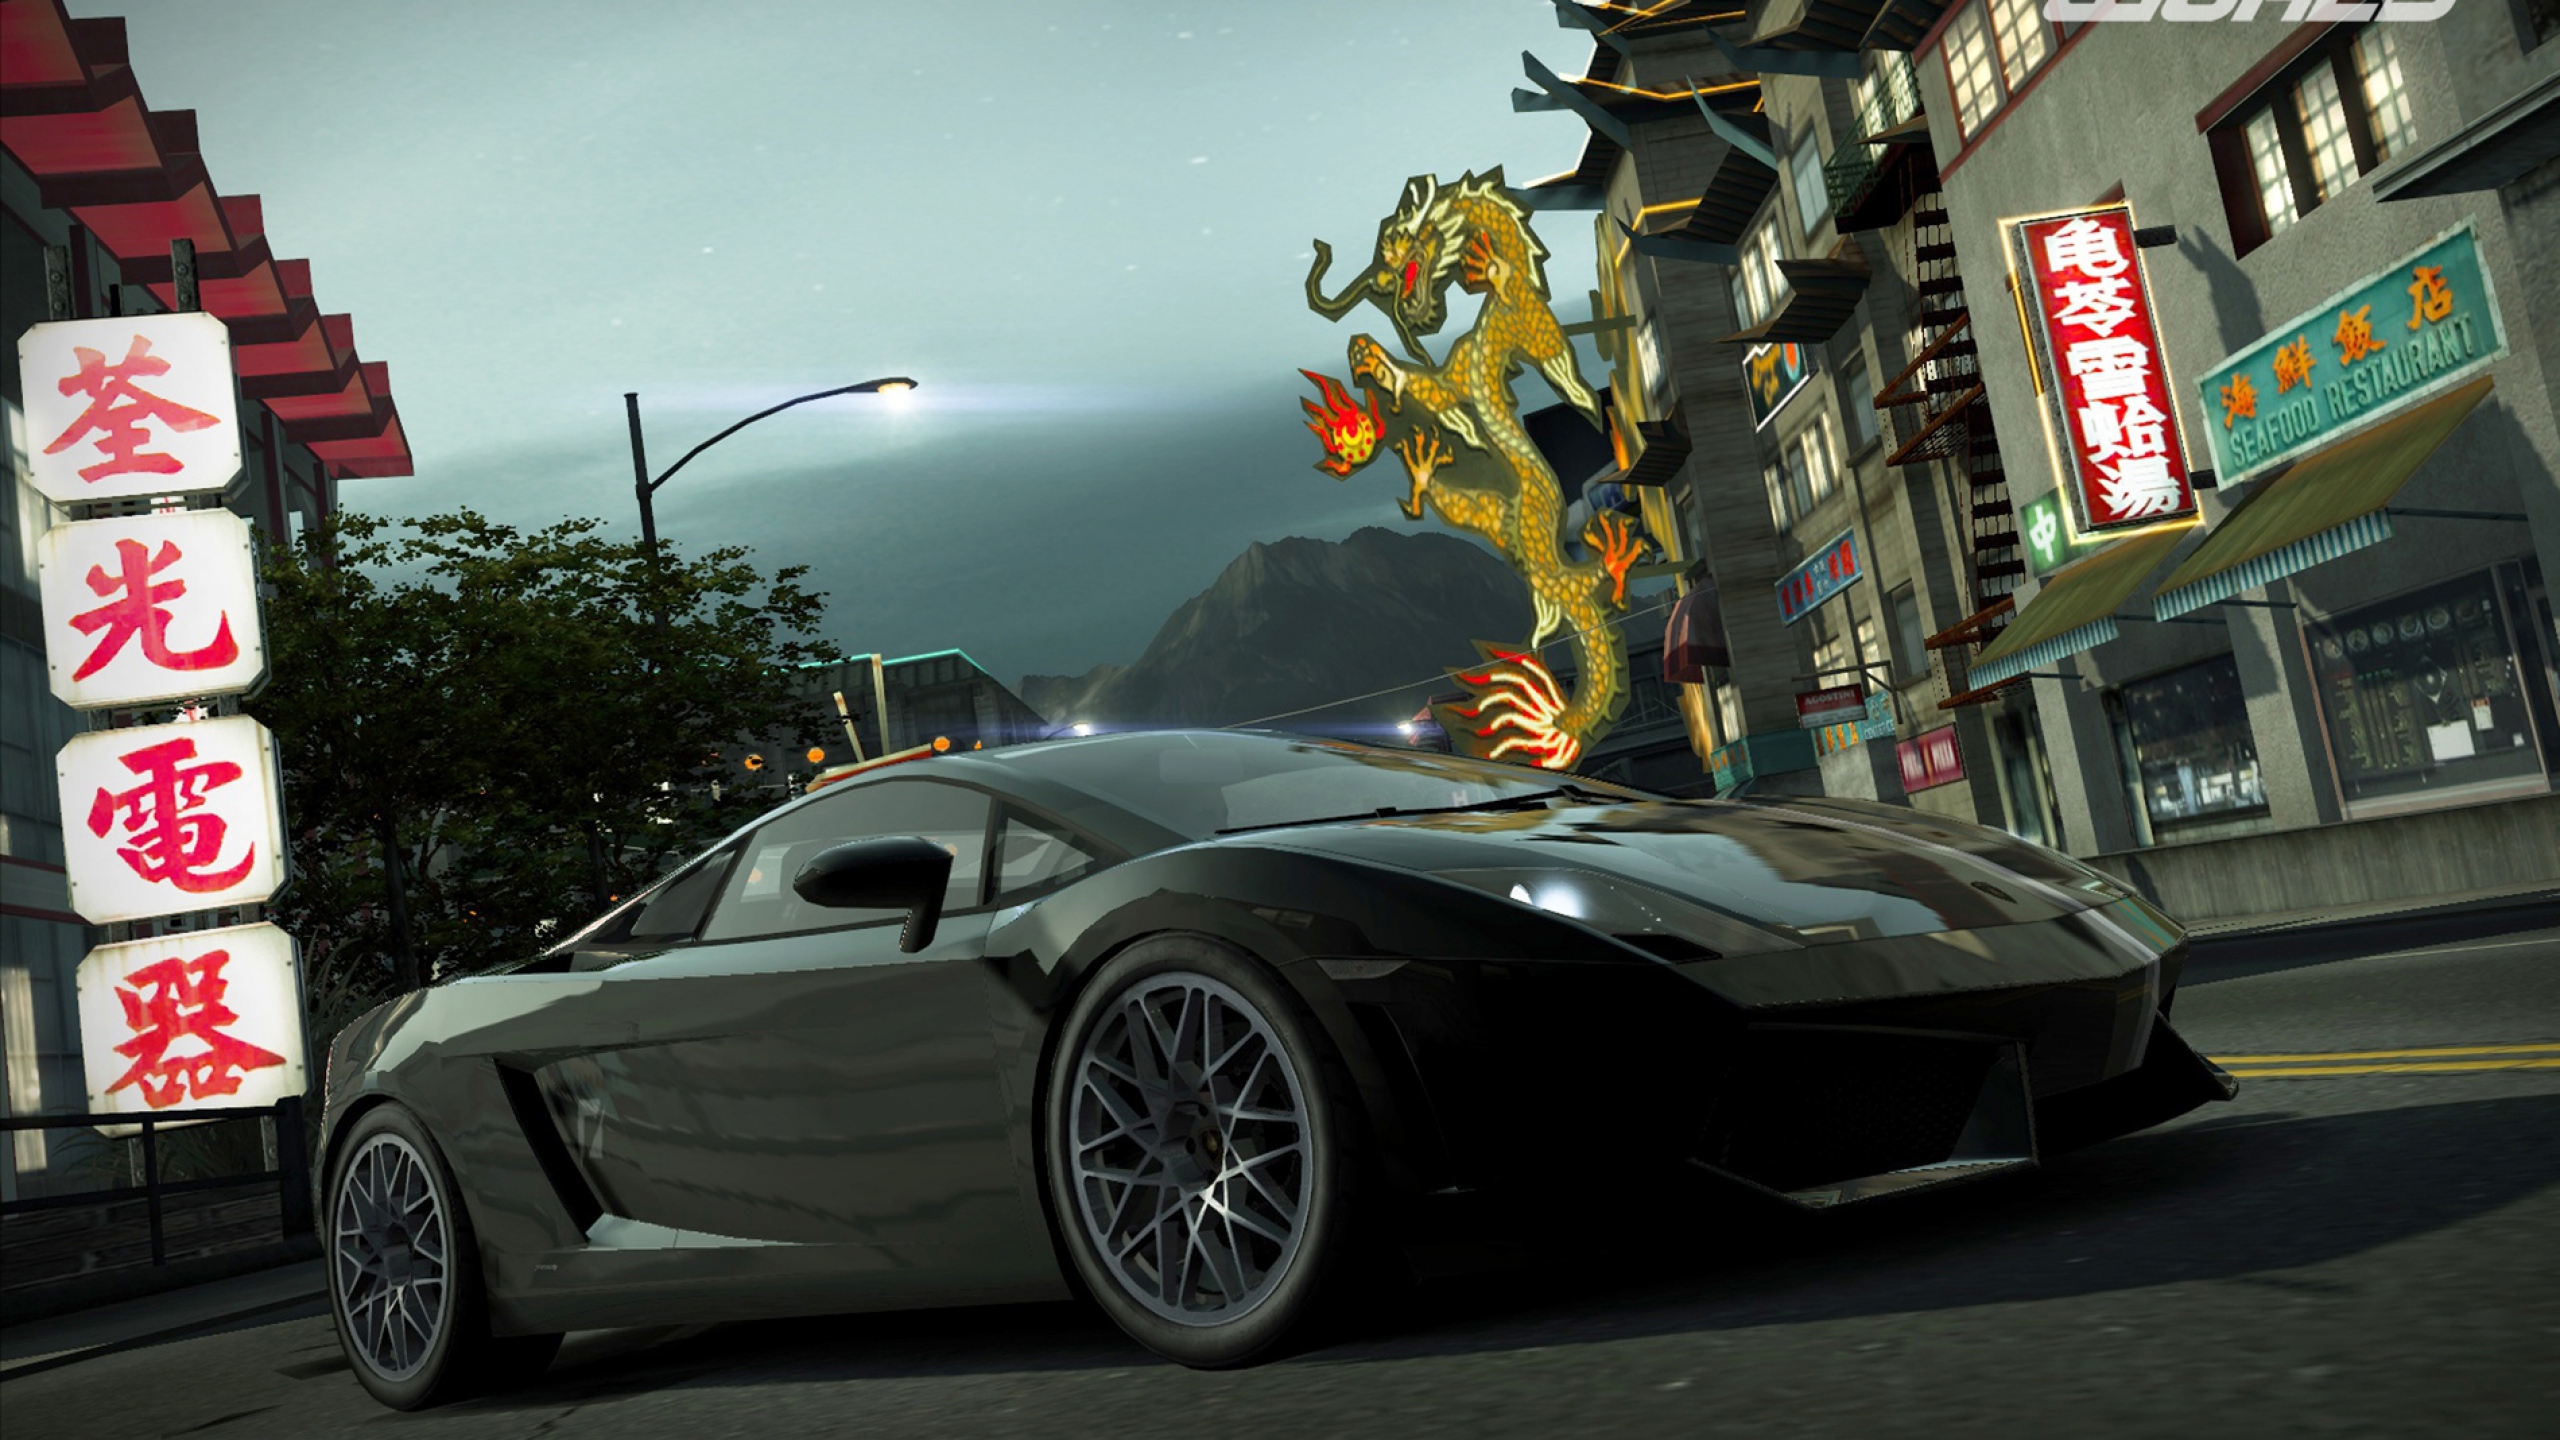 Download Wallpaper 2560x1440 Need for speed world, Machine, Road ...